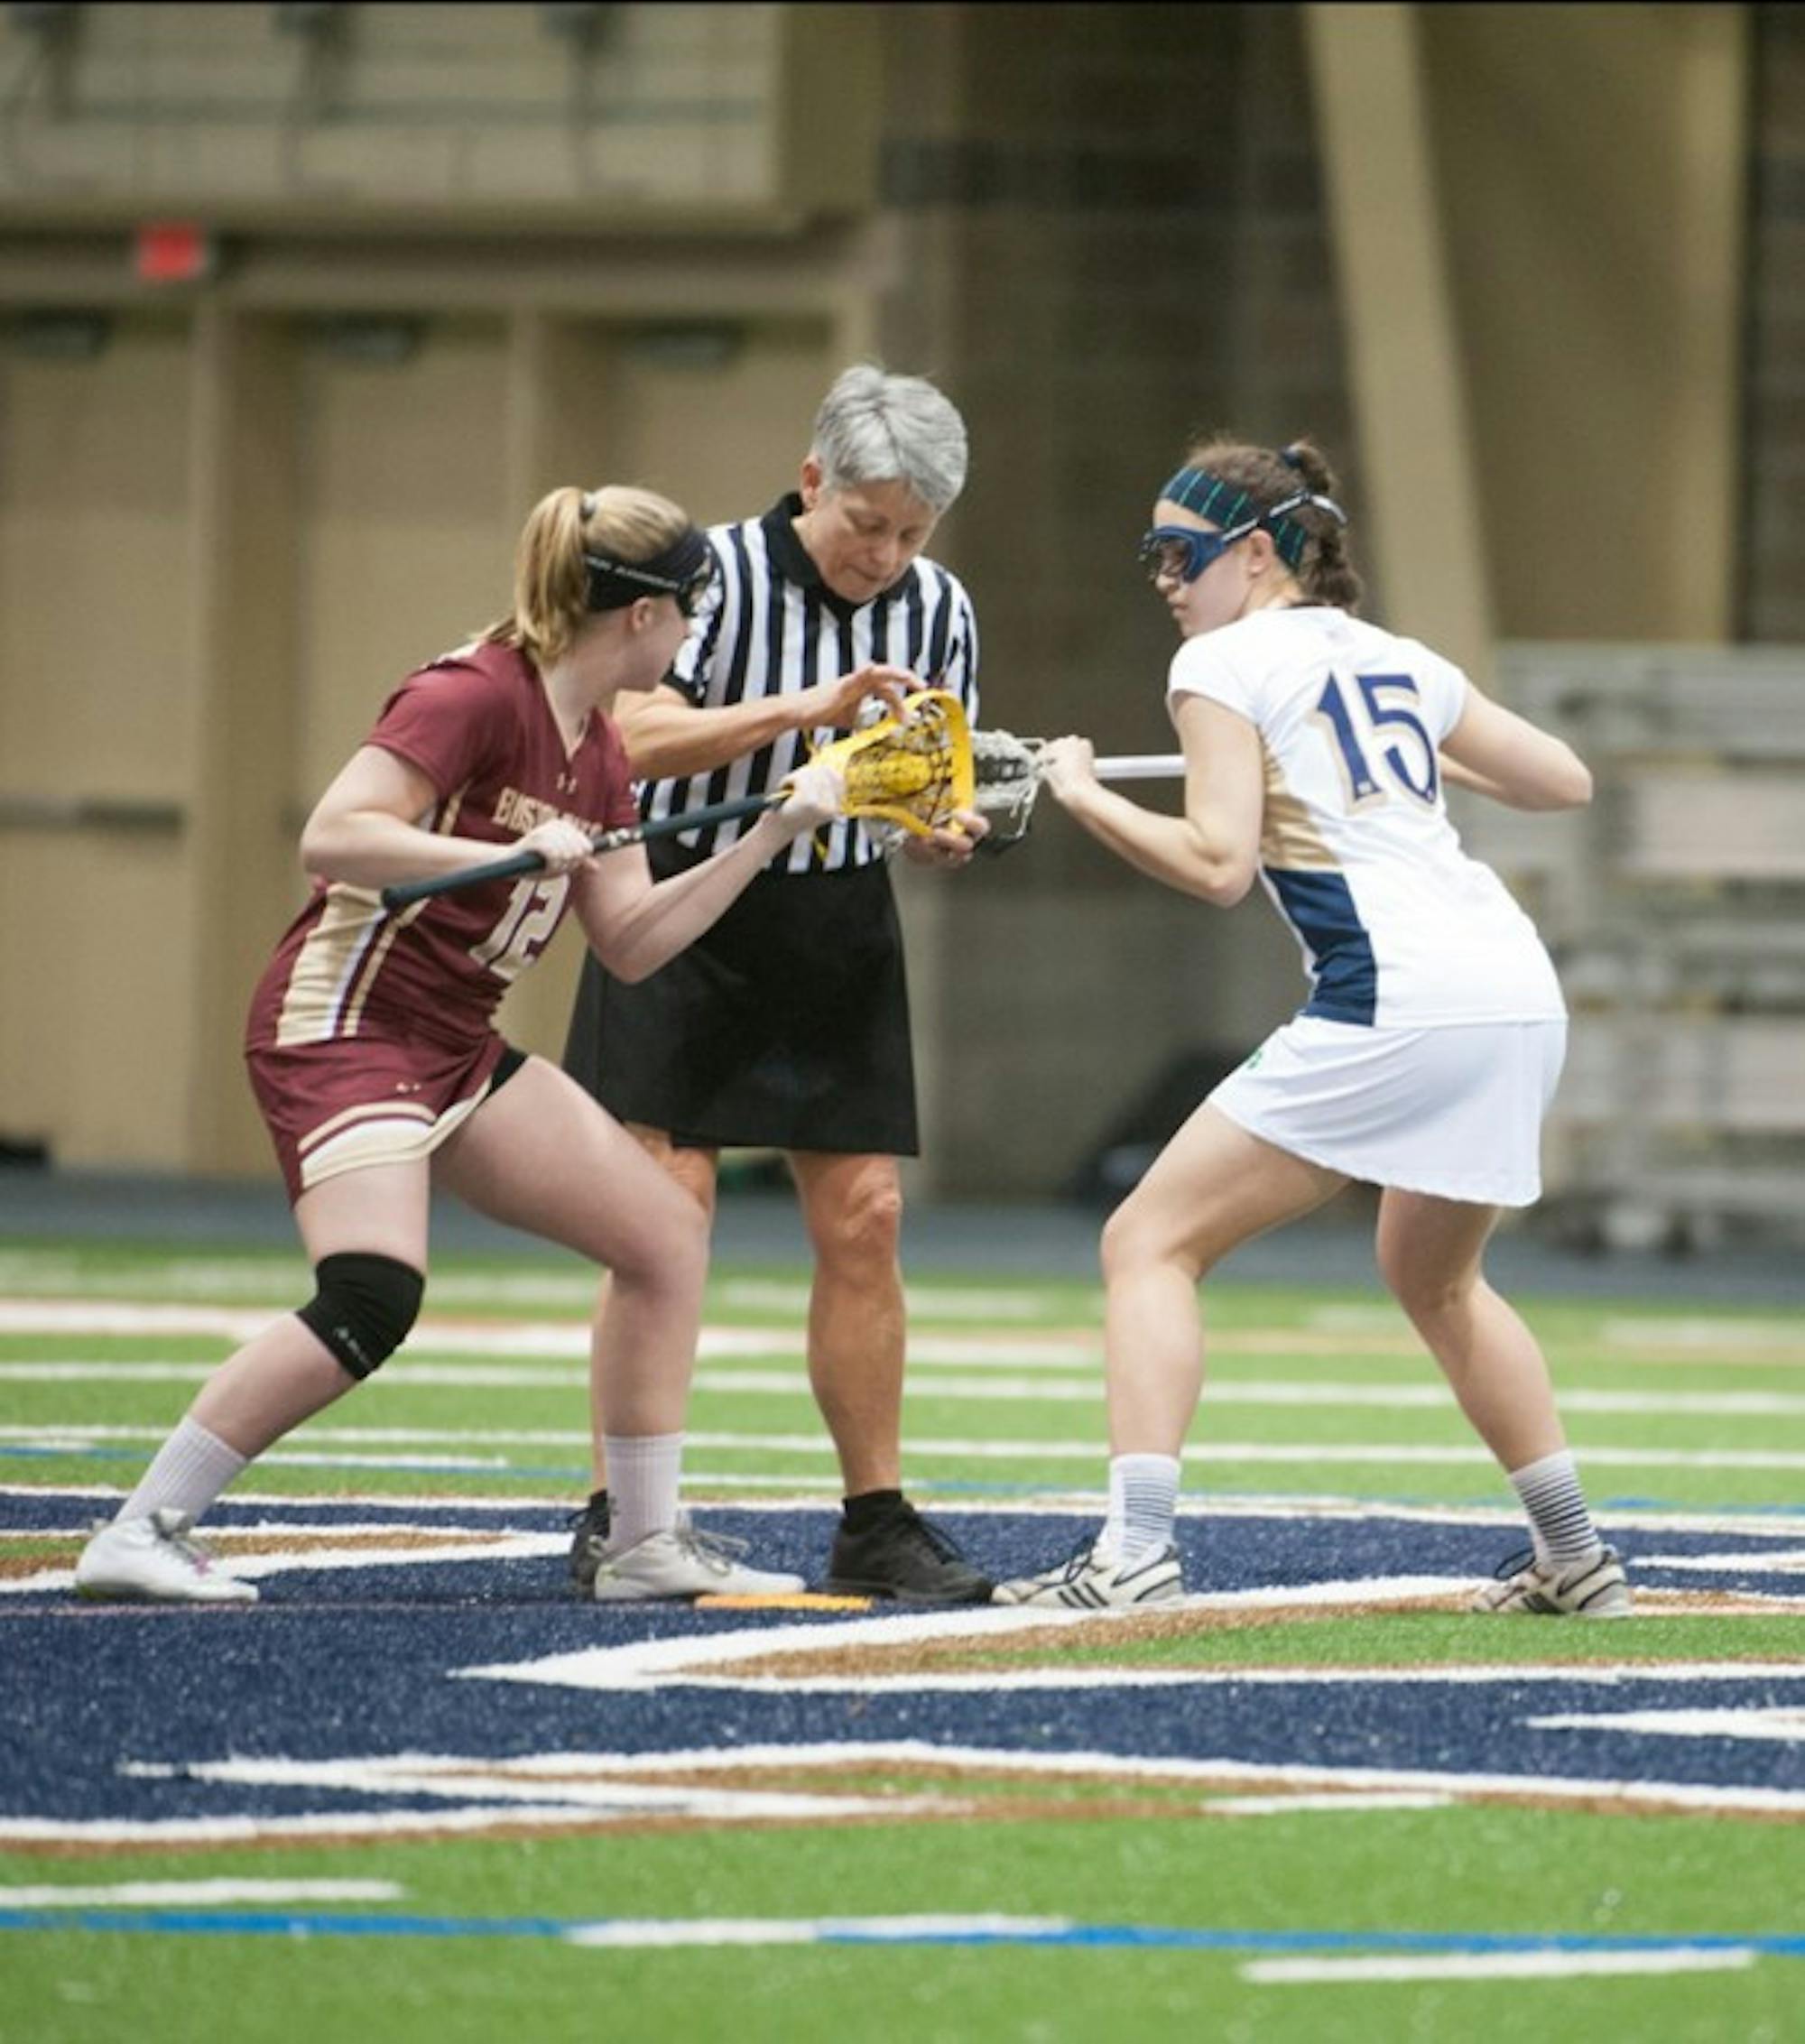 Freshman attack Cortney Fortunato (right) sets up for a draw in Notre Dame’s 15-10 loss to Boston College on Feb. 15.